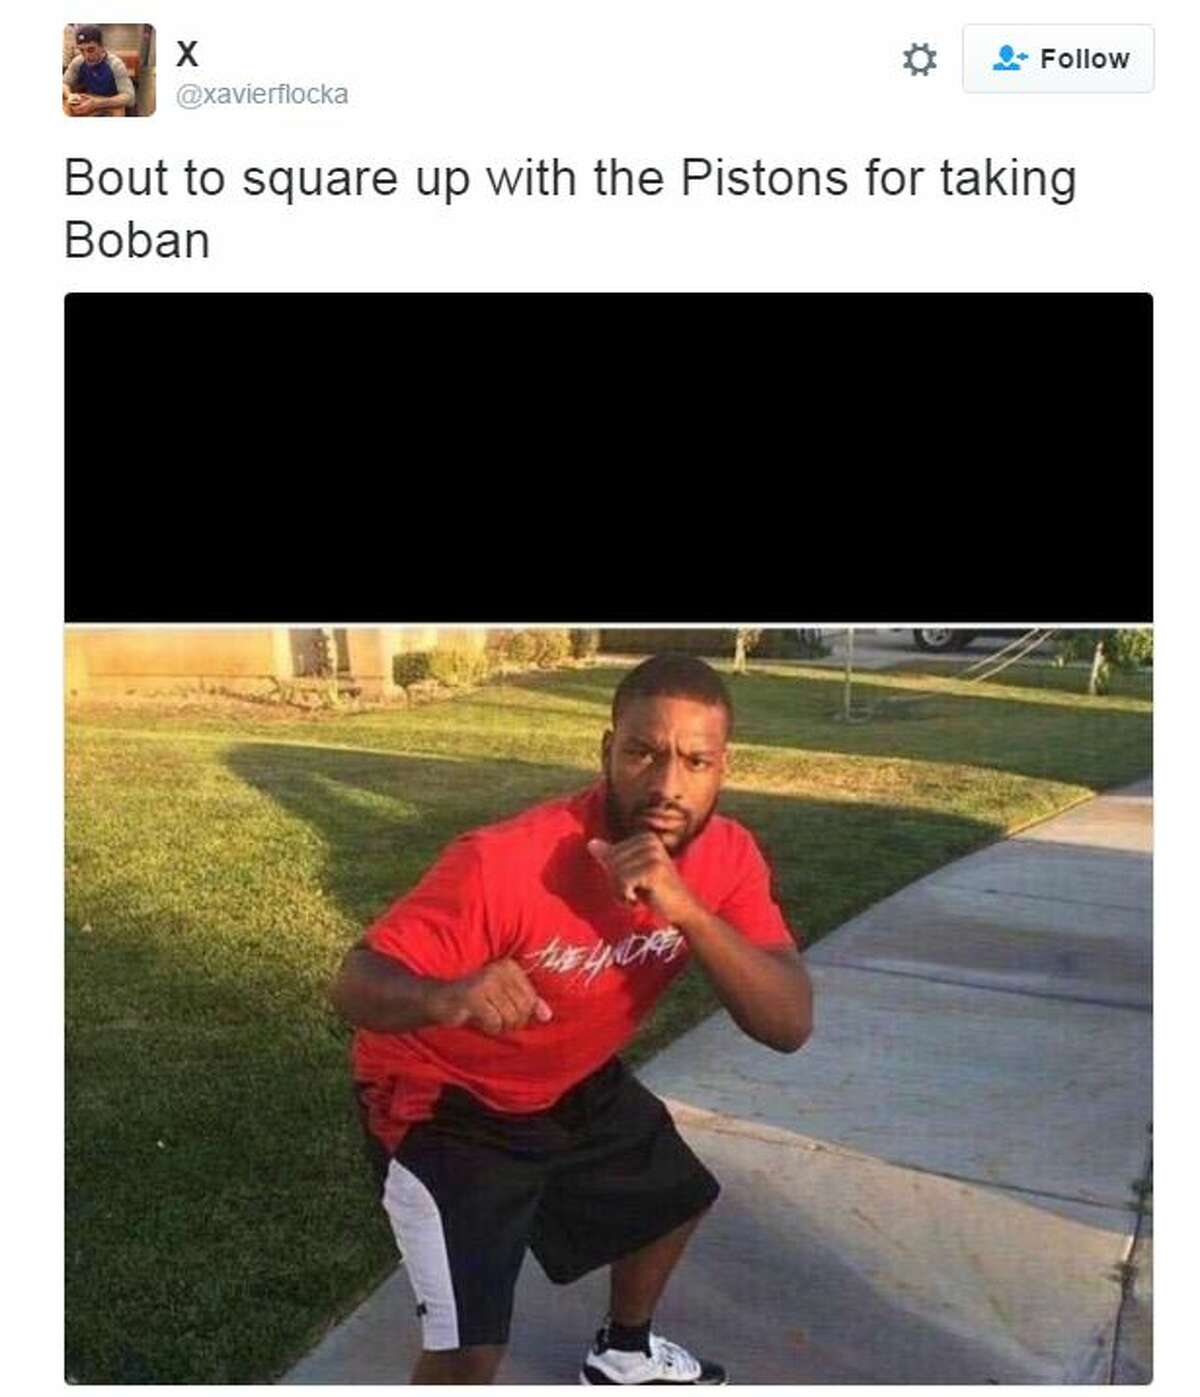 @xavierflocka: Bout to square up with the Pistons for taking Boban